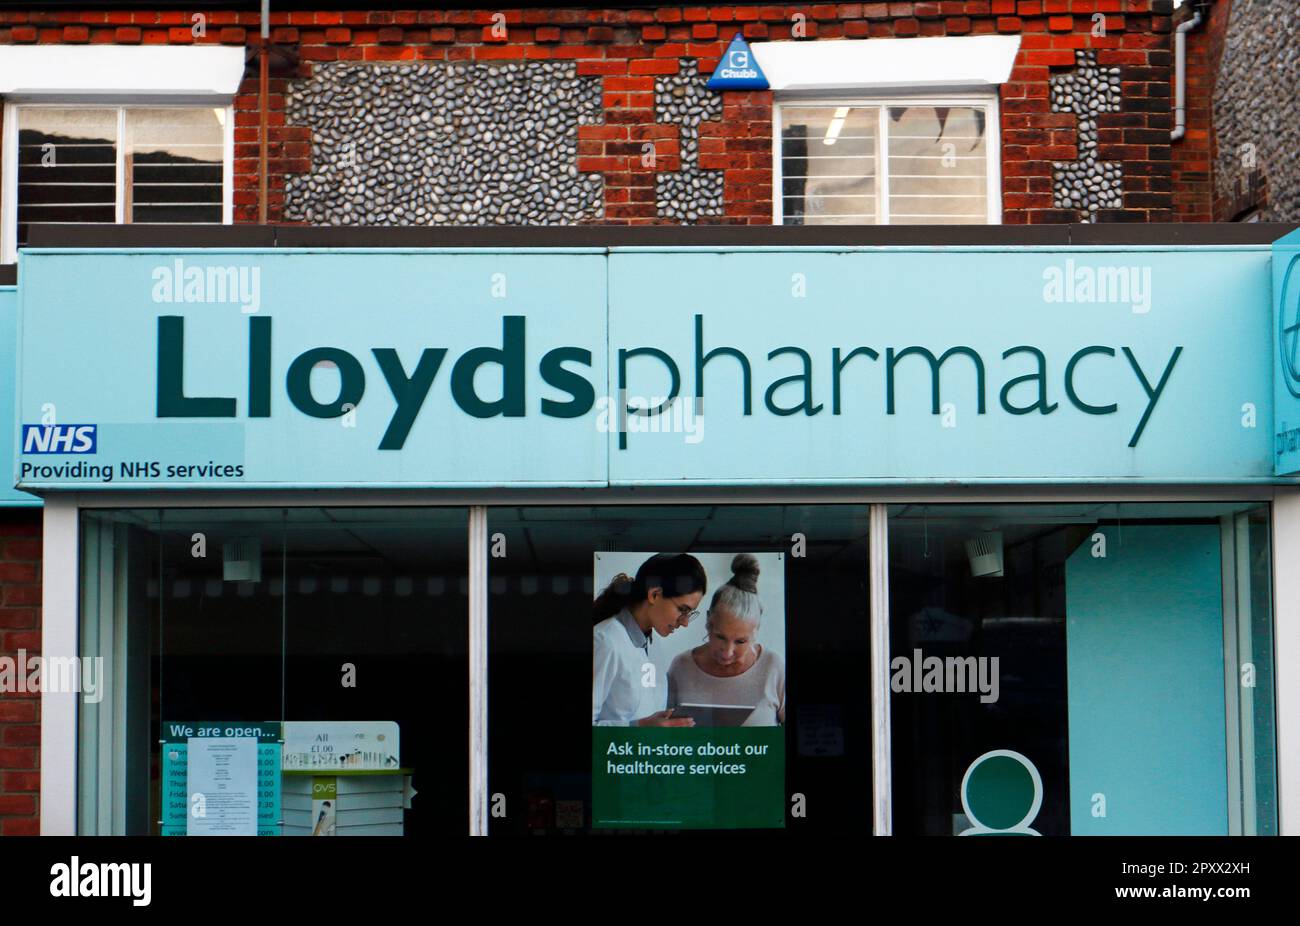 A view of the fascia above the shop front advertising LLoyds Pharmacy in the North Norfolk town of Sheringham, Norfolk, England, United Kingdom. Stock Photo